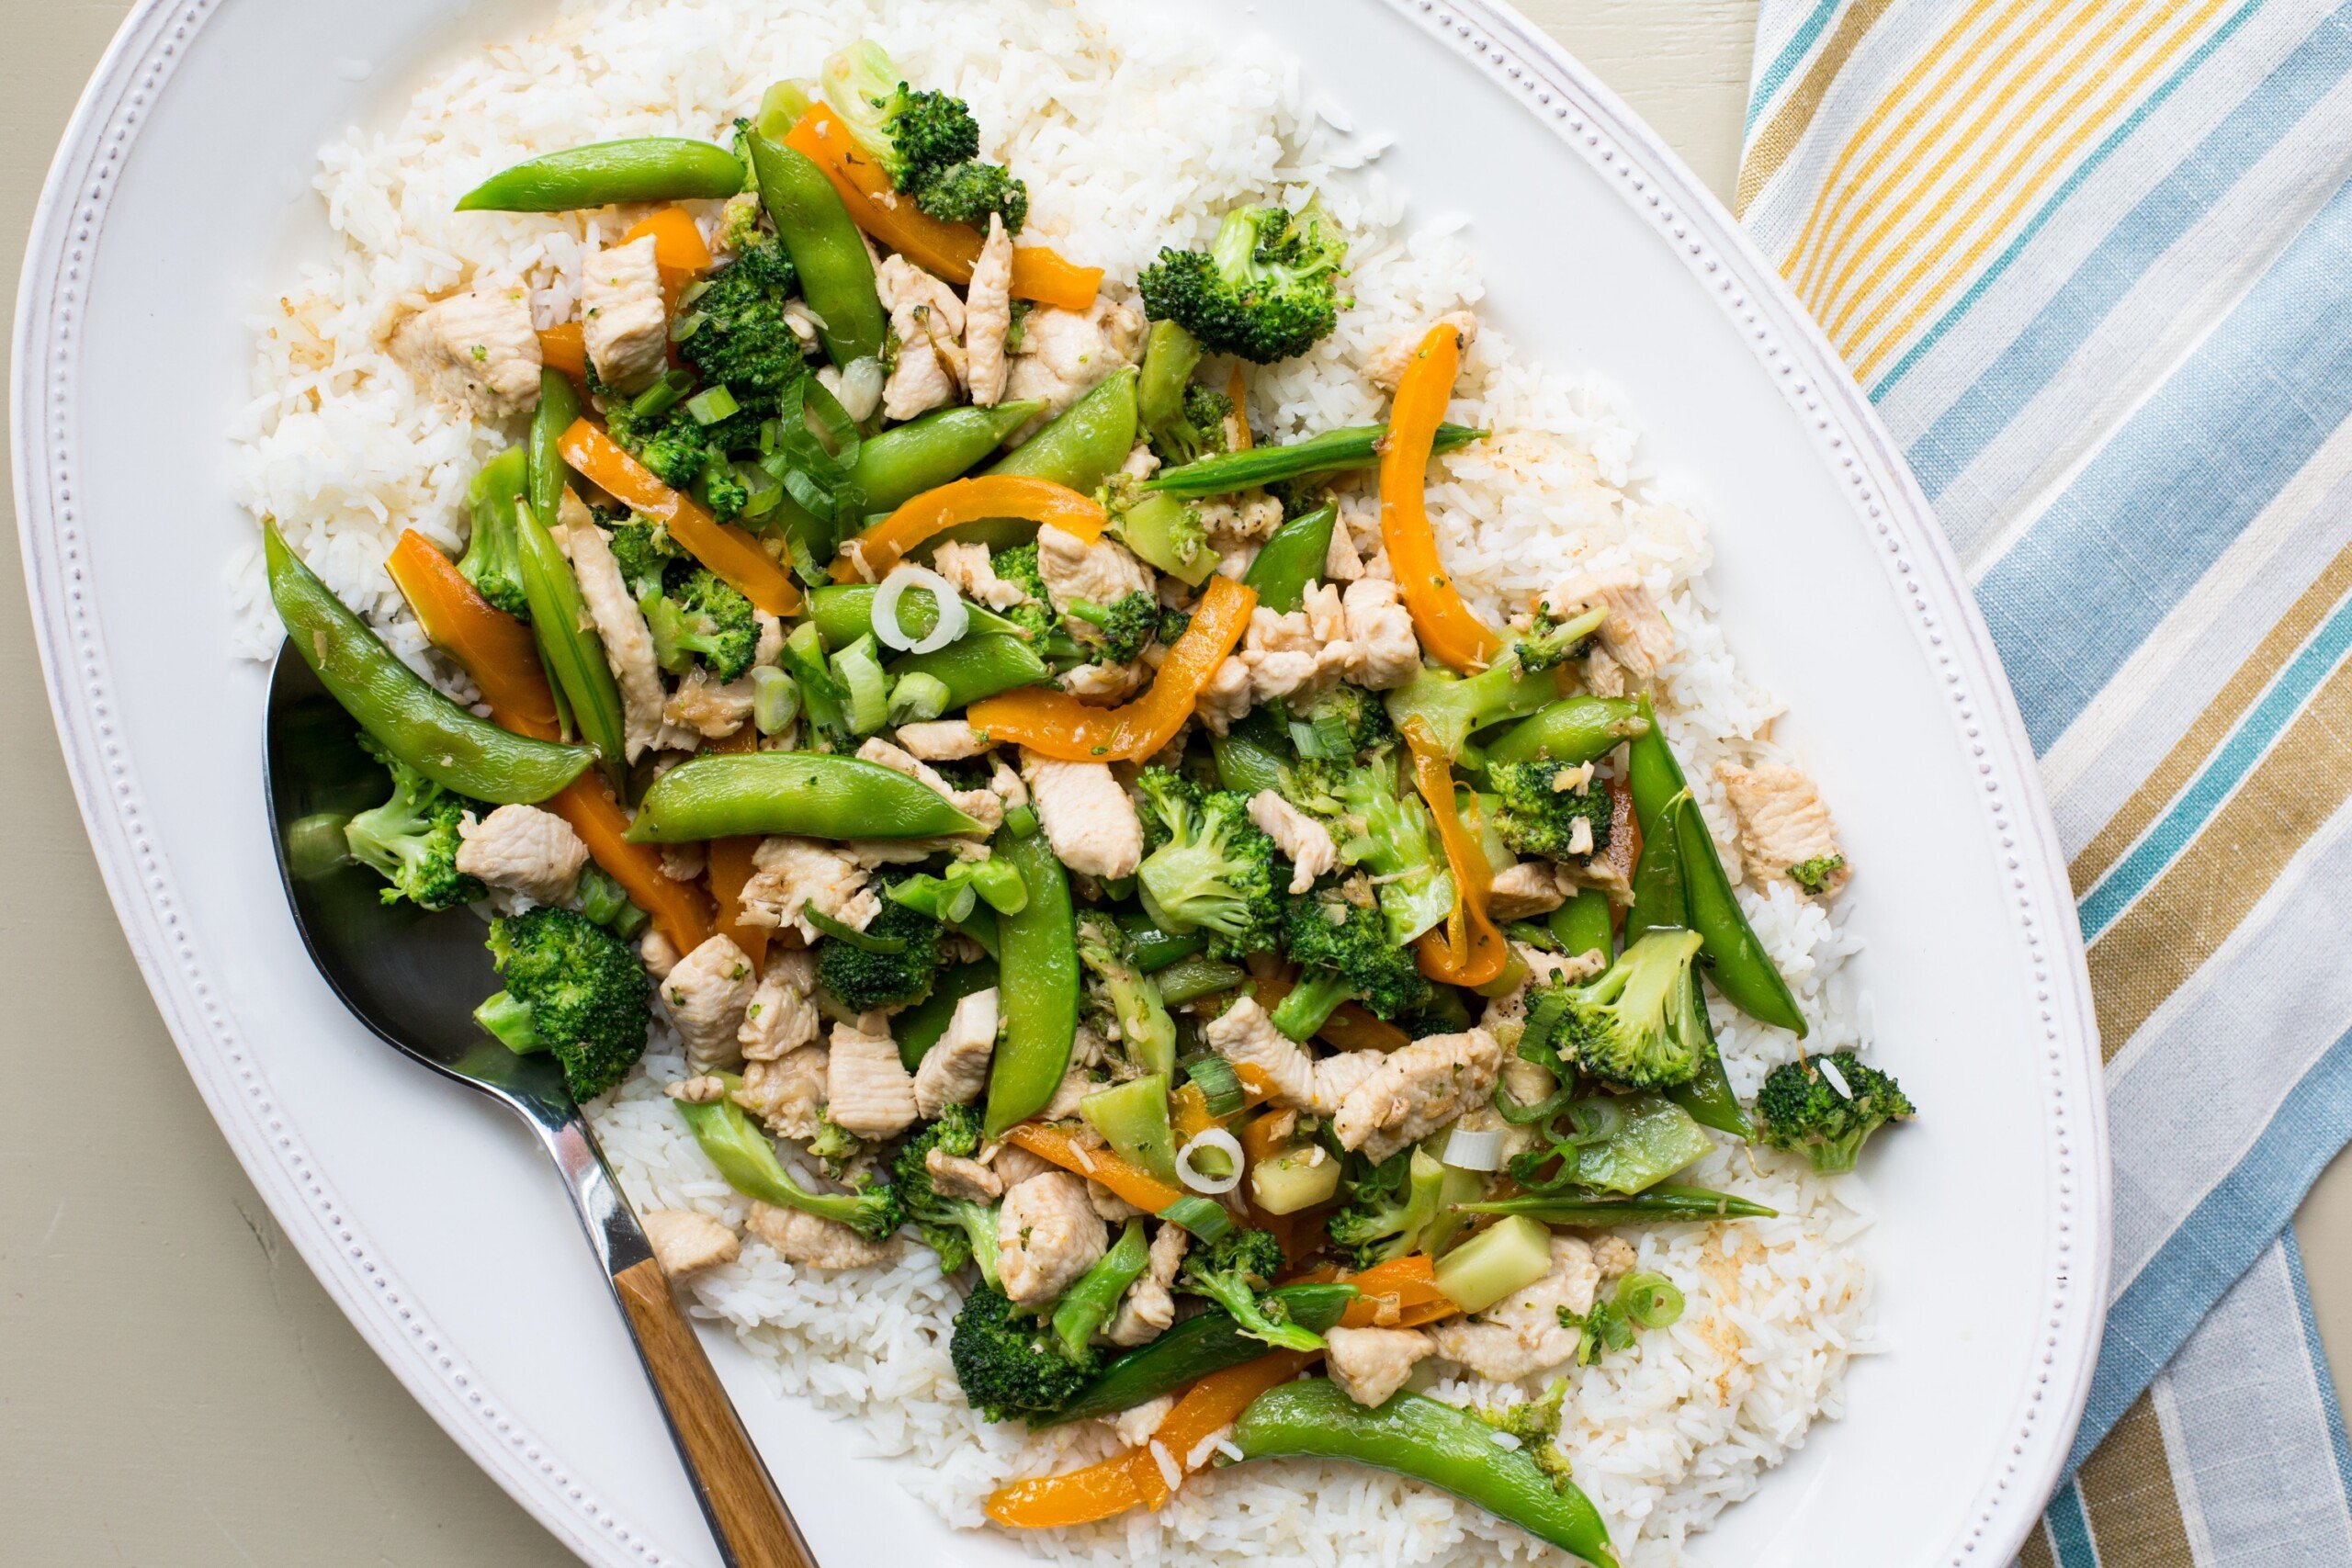 Stir-fry with chicken, broccoli, and sugar snap peas served over white rice on plate.